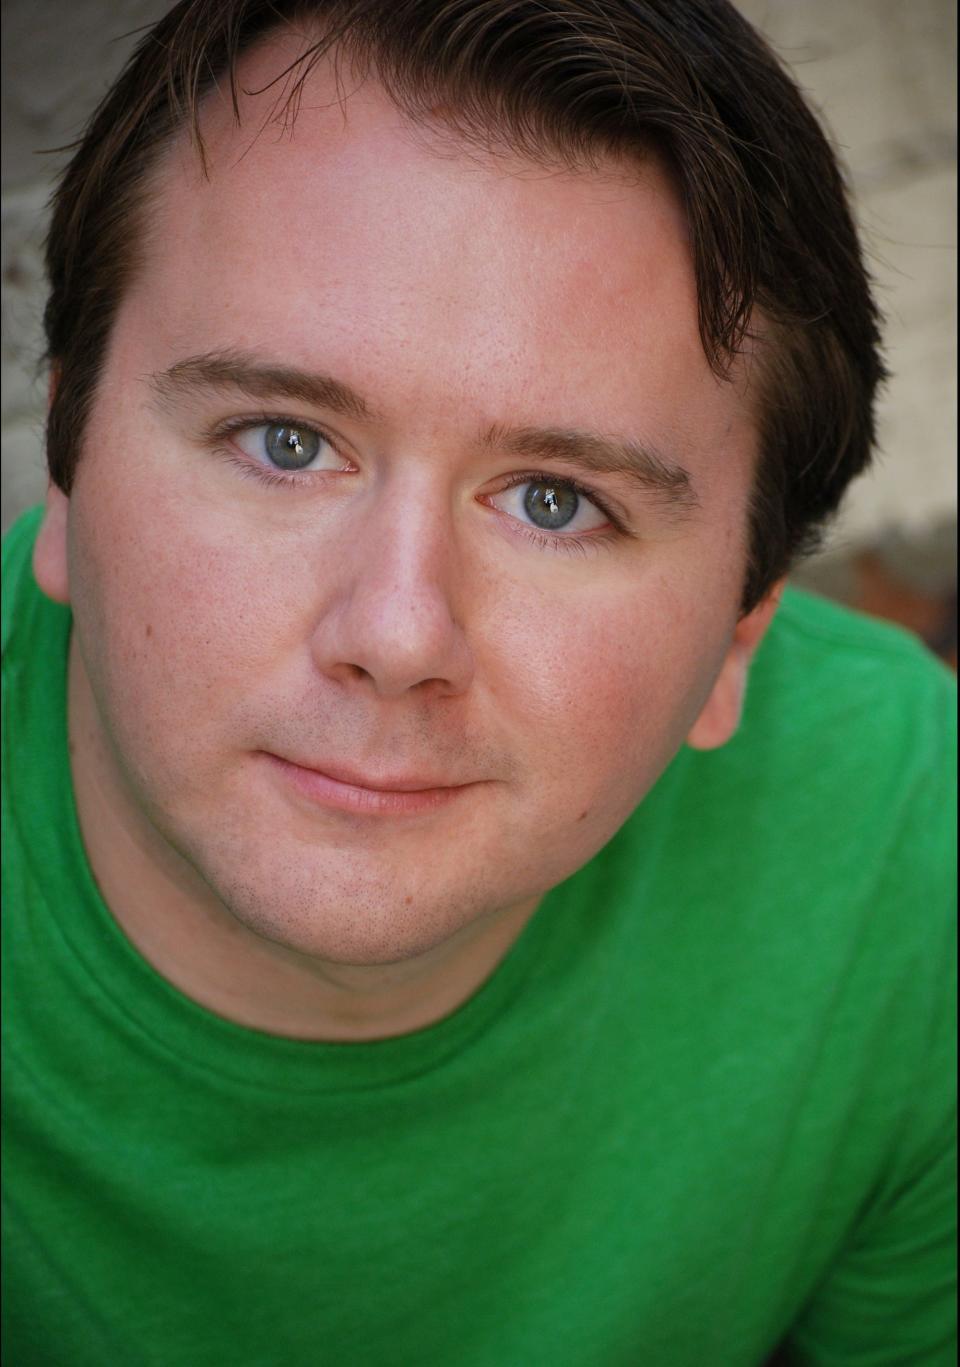 Scott Cote reprises the role he played in the national tour of “The Play That Goes Wrong” at Florida Studio Theatre.